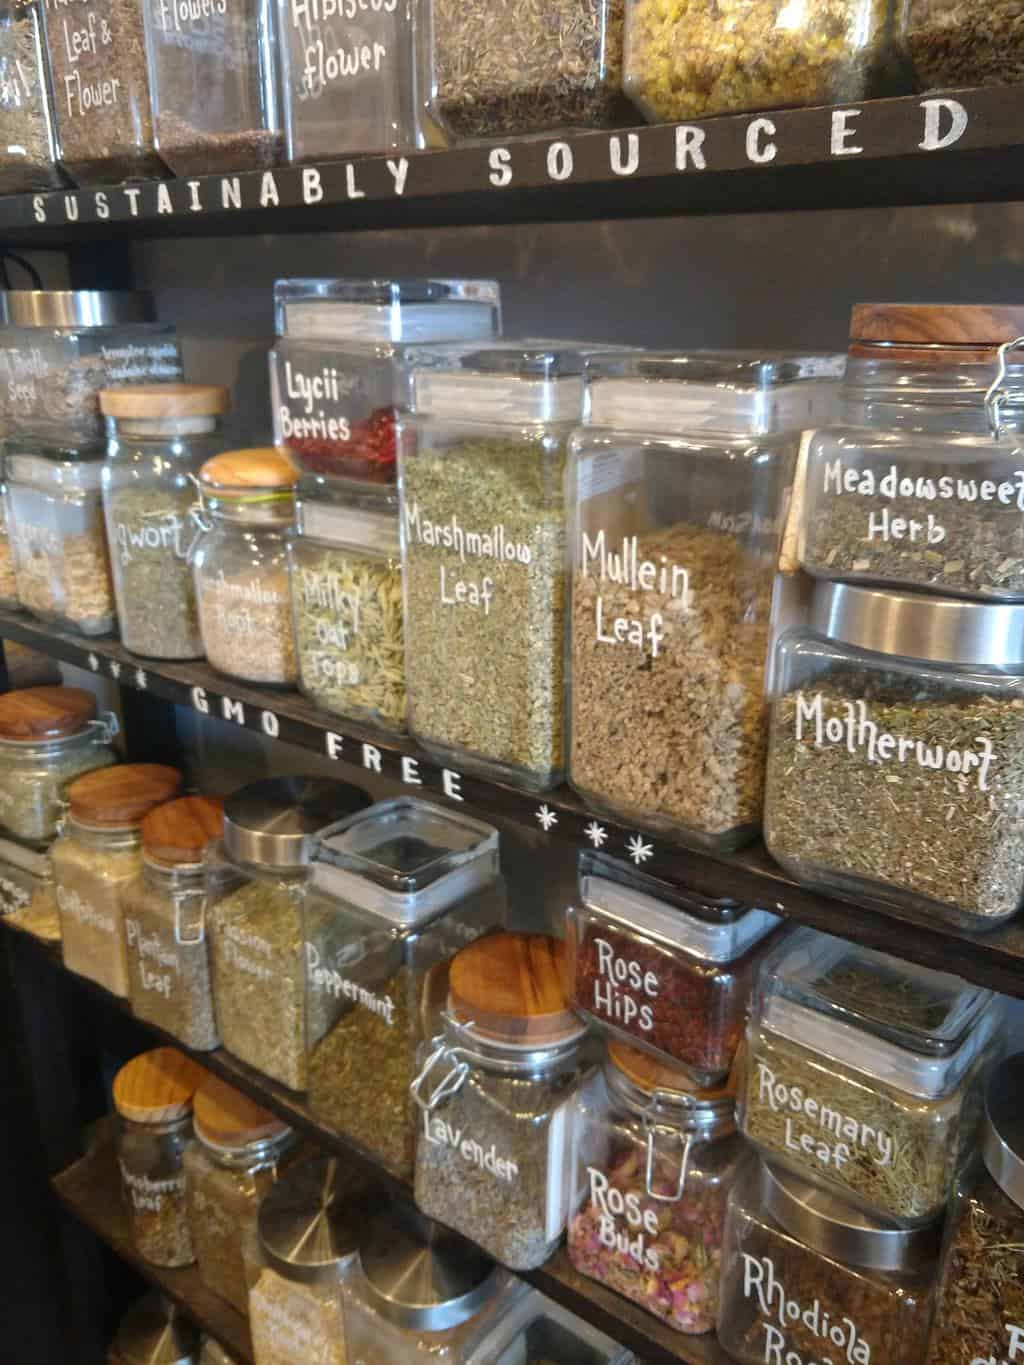 The 5 Best Natural Health Herbal Apothecary Stores in Boston